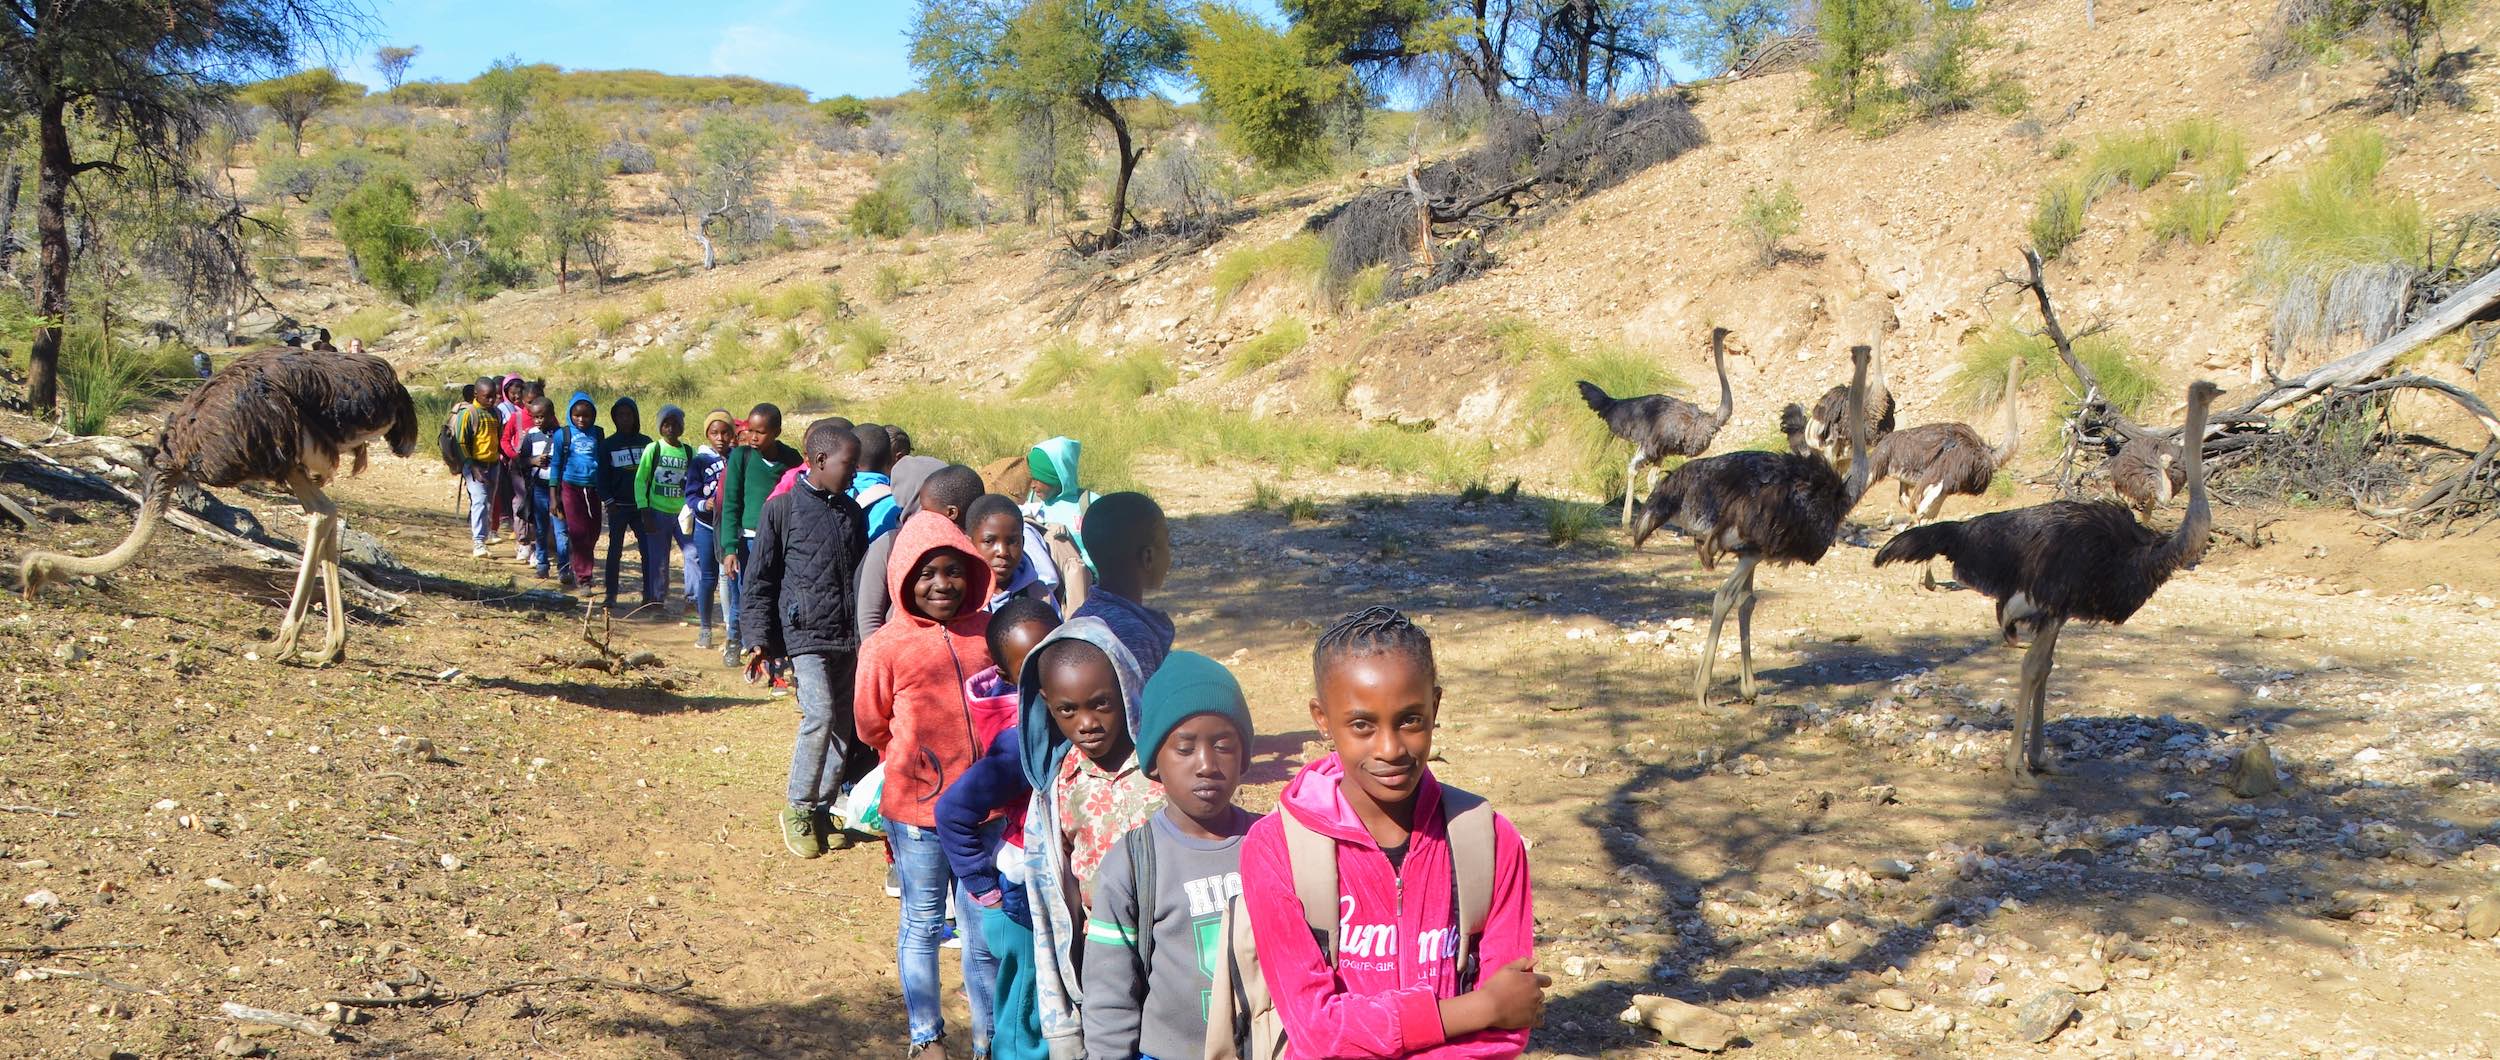 A line of children on a KEEP excursion encounter several giraffe in a dry riverbed.